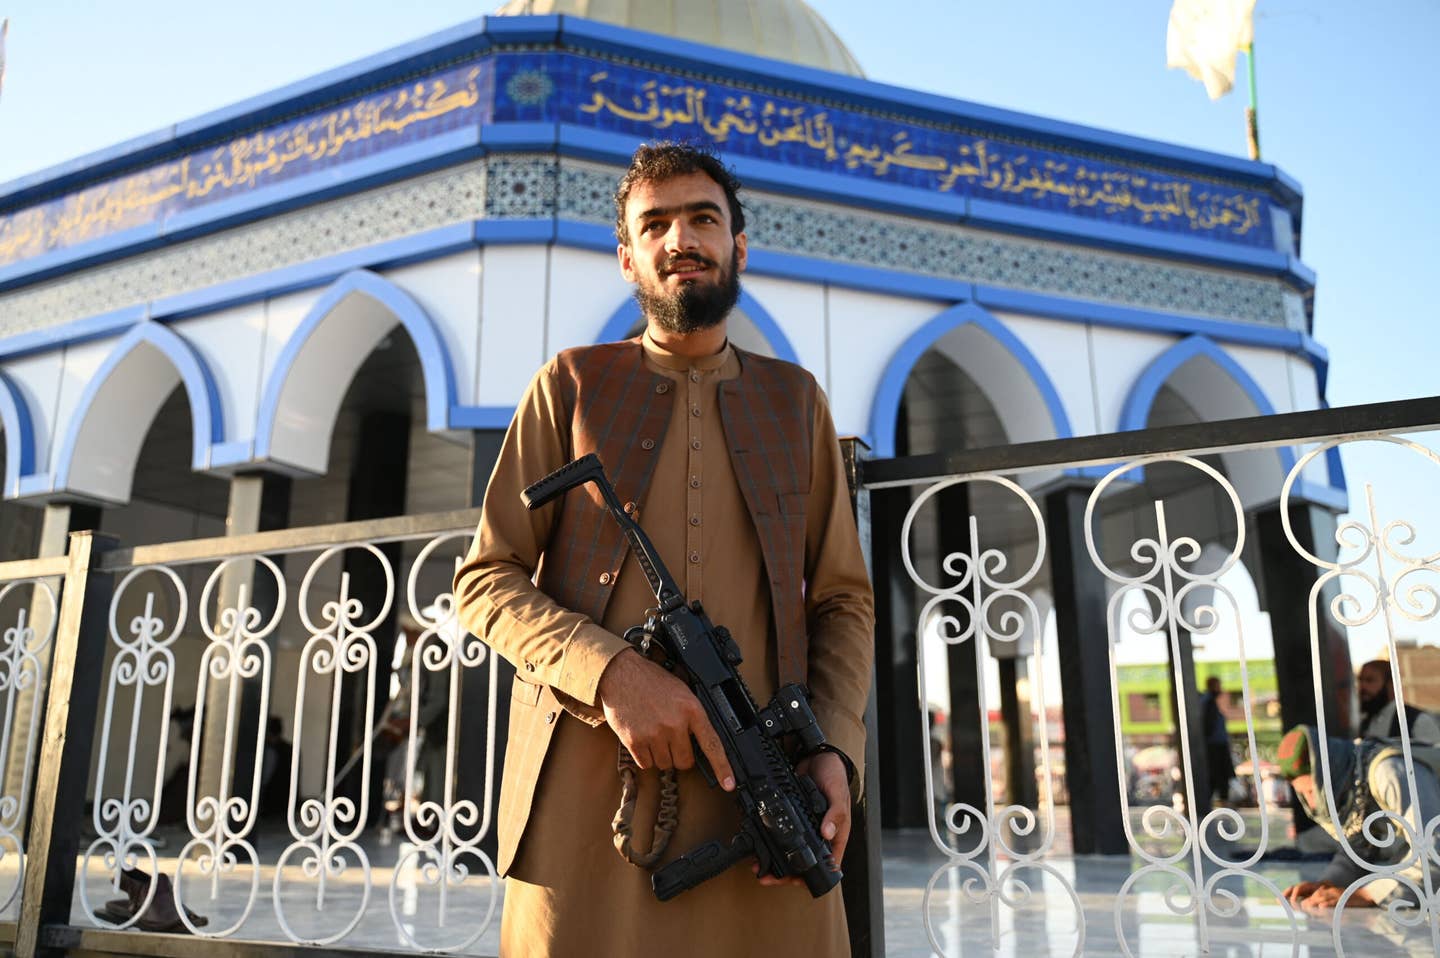 A Taliban fighter poses in front of a replica of Al-Aqsa Mosque at Kampani Square on the outskirts of Kabul on May 23, 2022. (Photo by WAKIL KOHSAR/AFP via Getty Images)